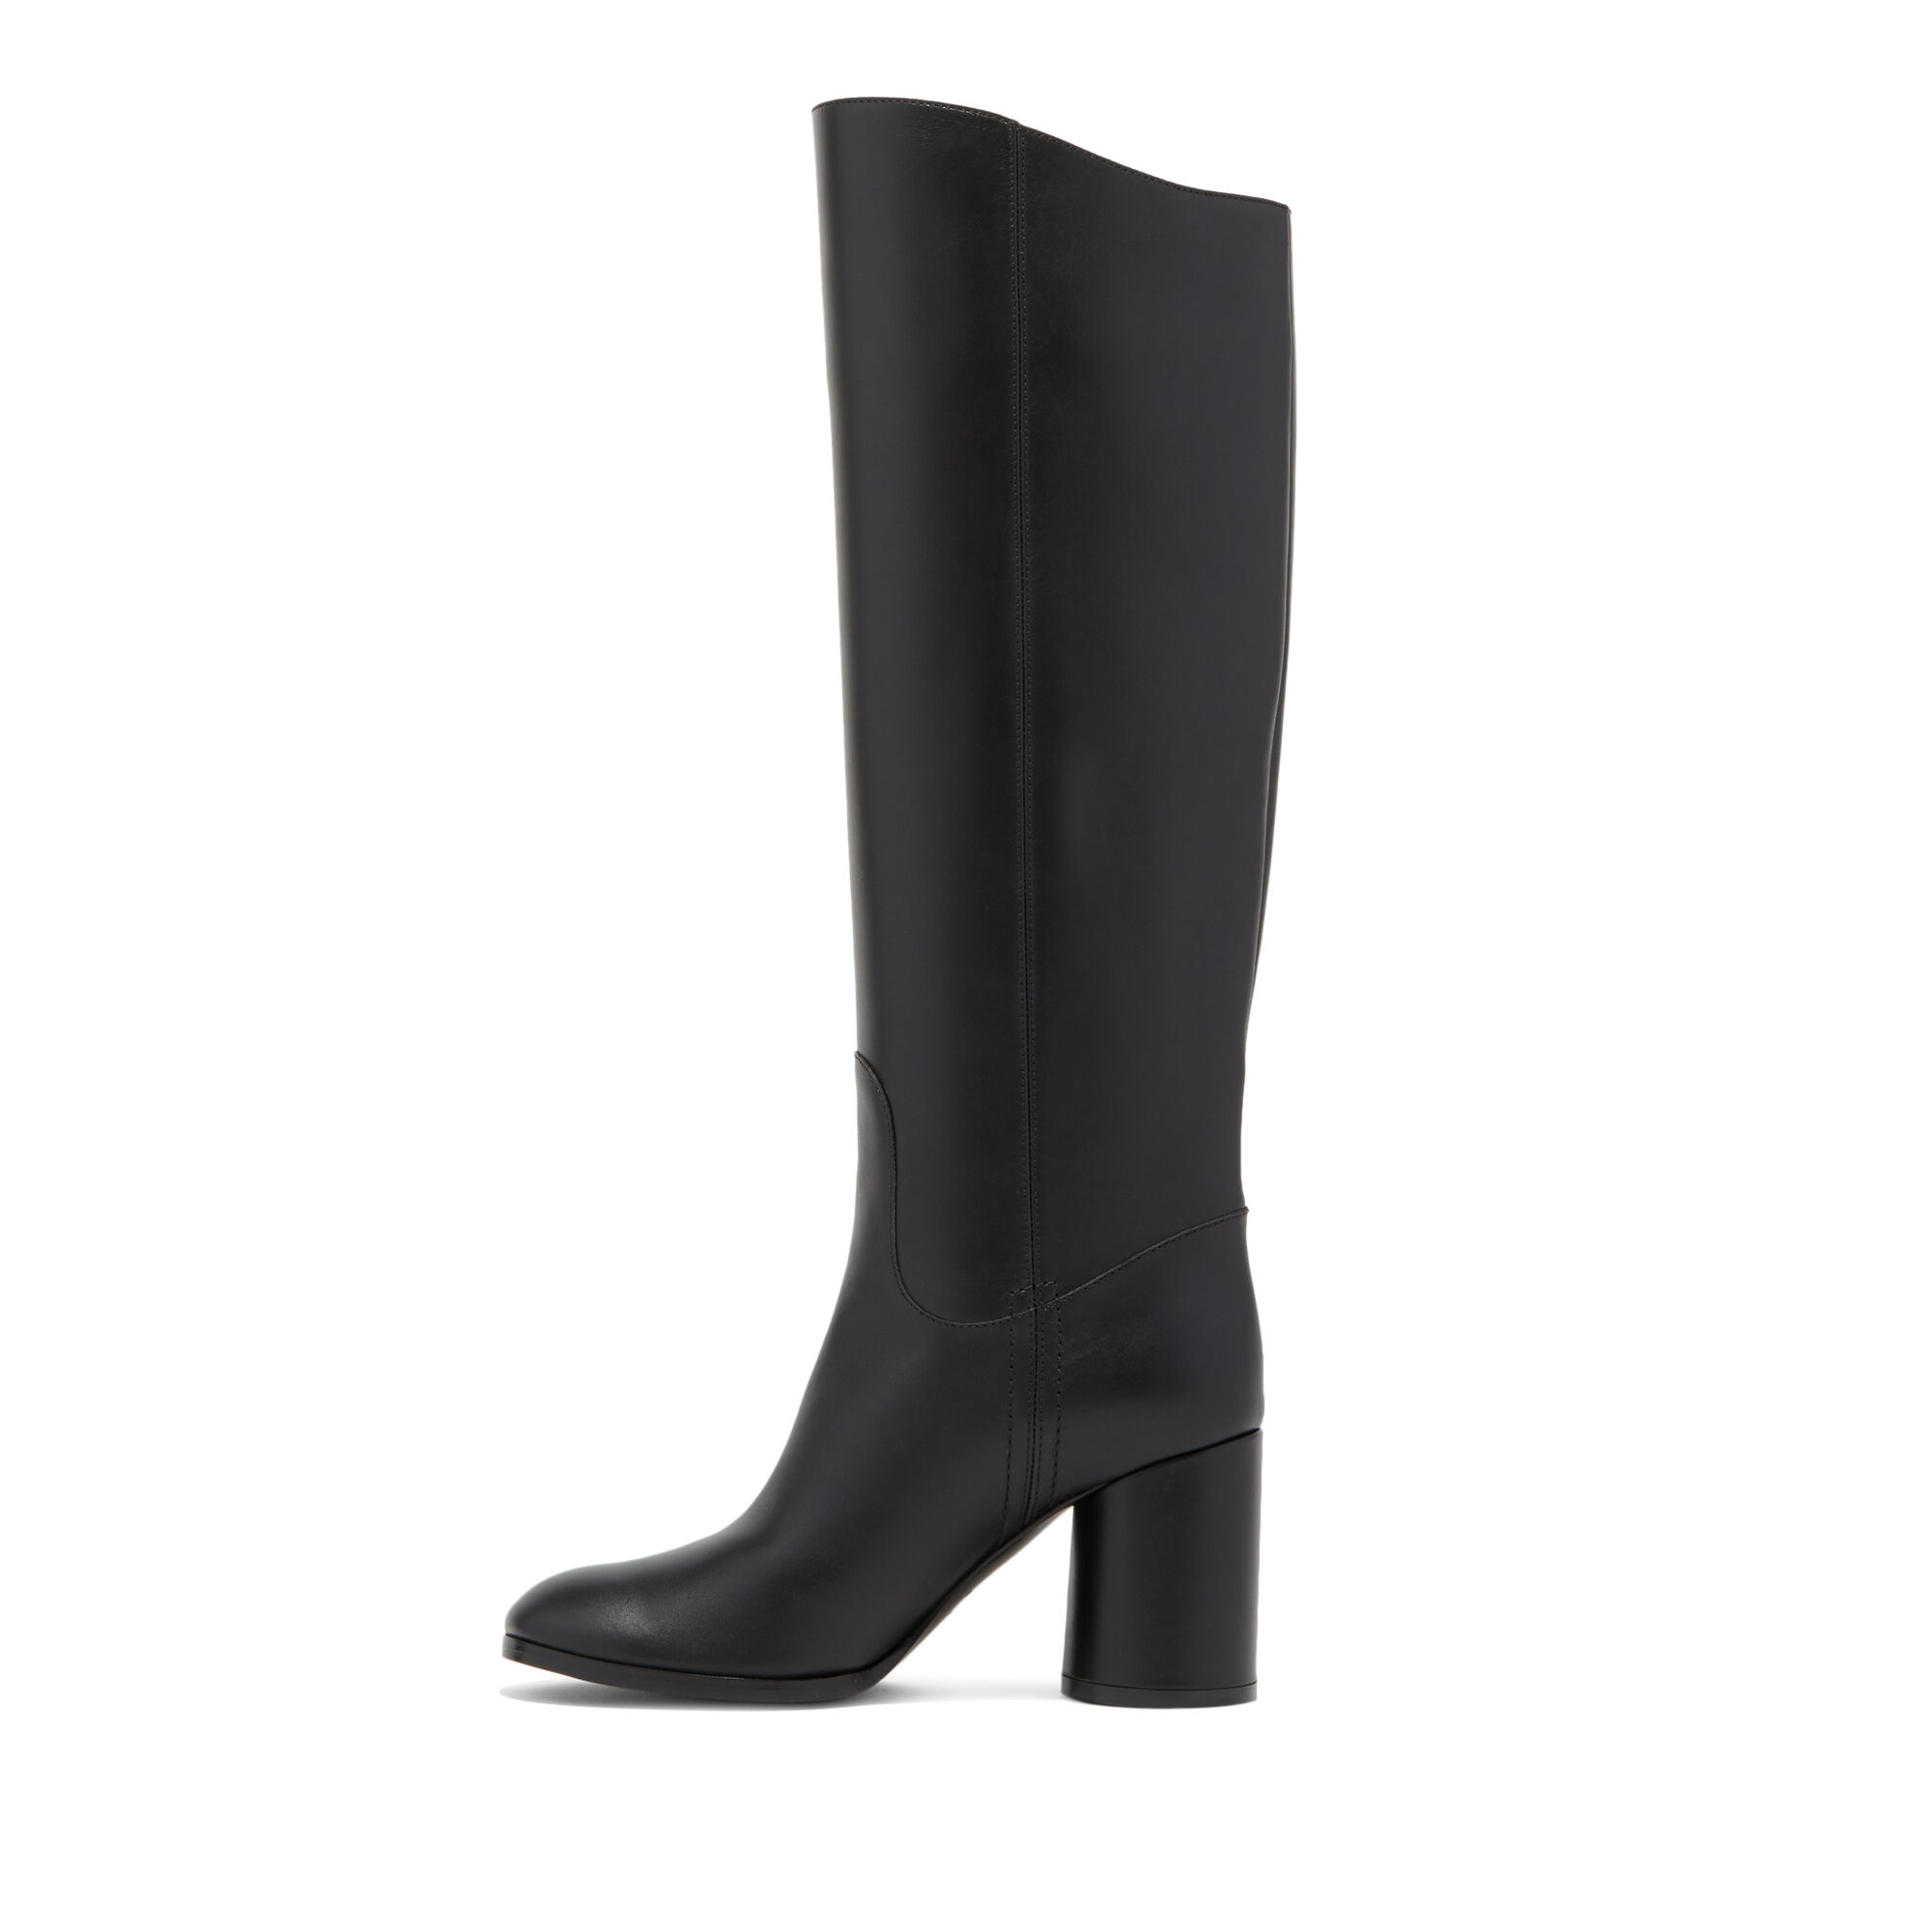 Casadei 140mm heeled leather boots - Black